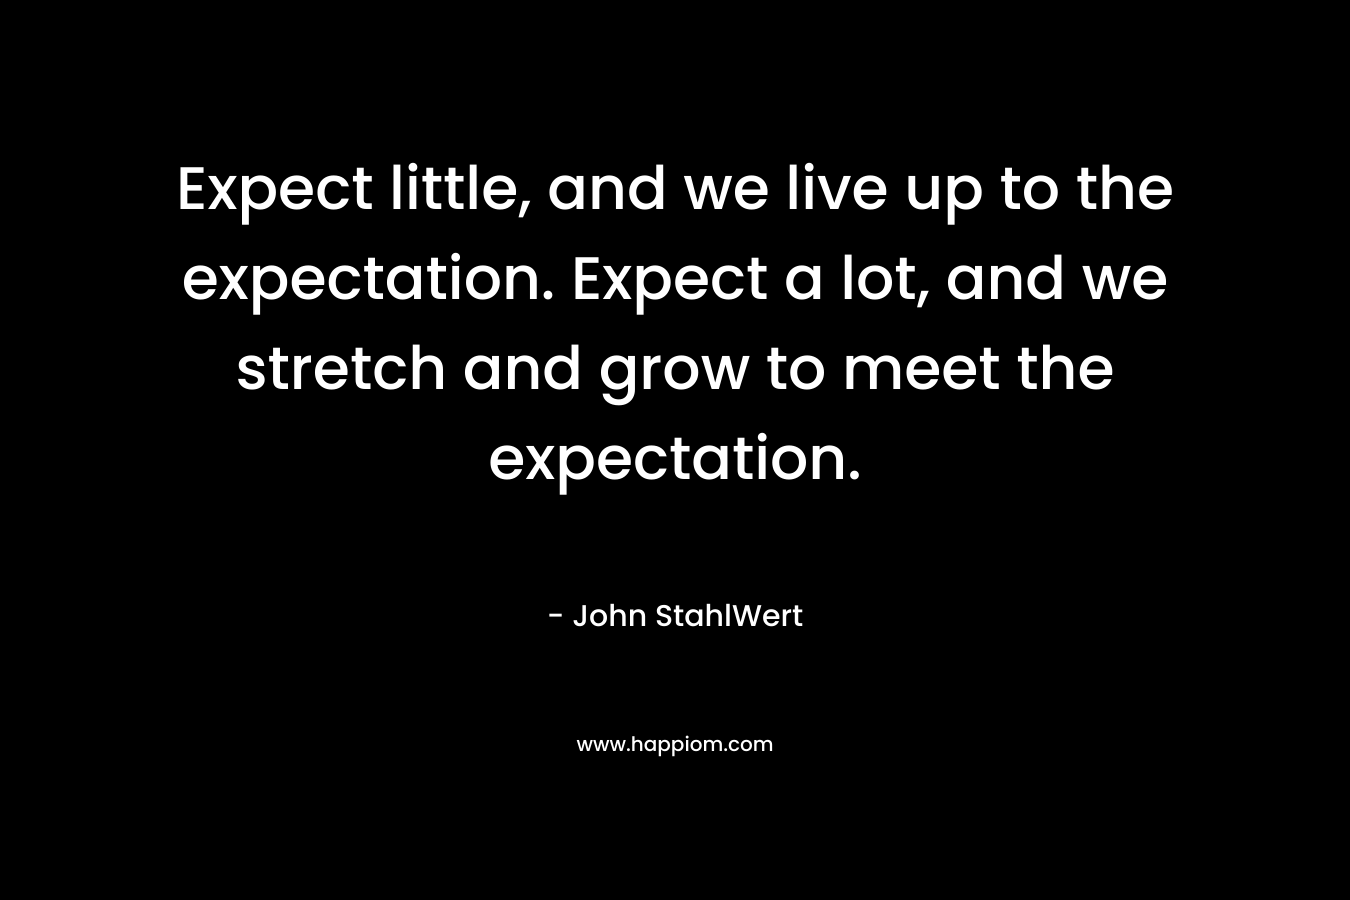 Expect little, and we live up to the expectation. Expect a lot, and we stretch and grow to meet the expectation.